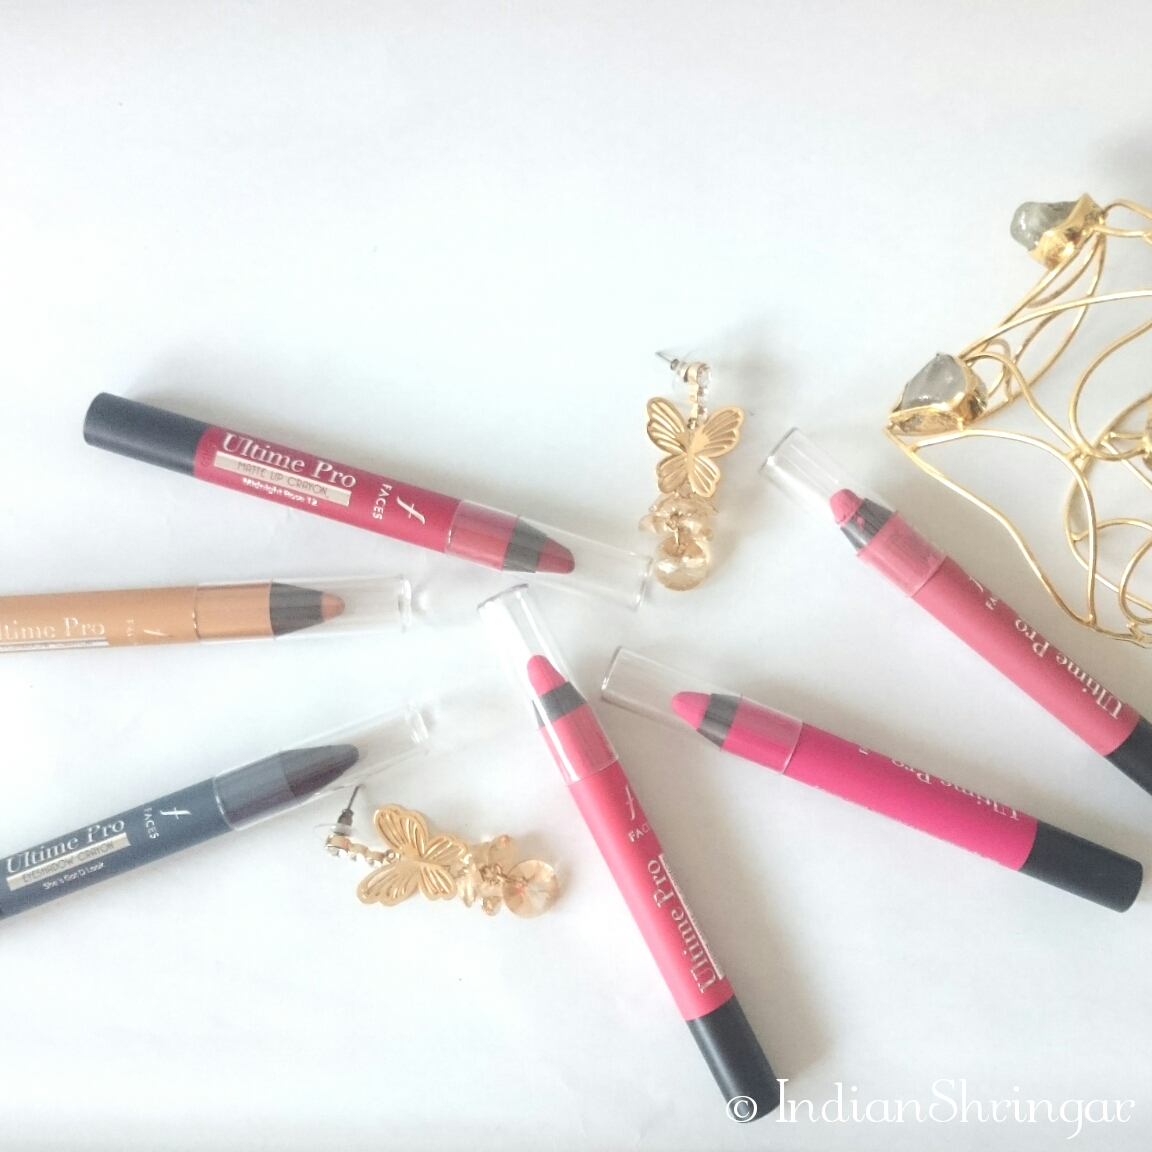 FACES Ultime Pro Lip Crayon and Eye Crayon review and swatches